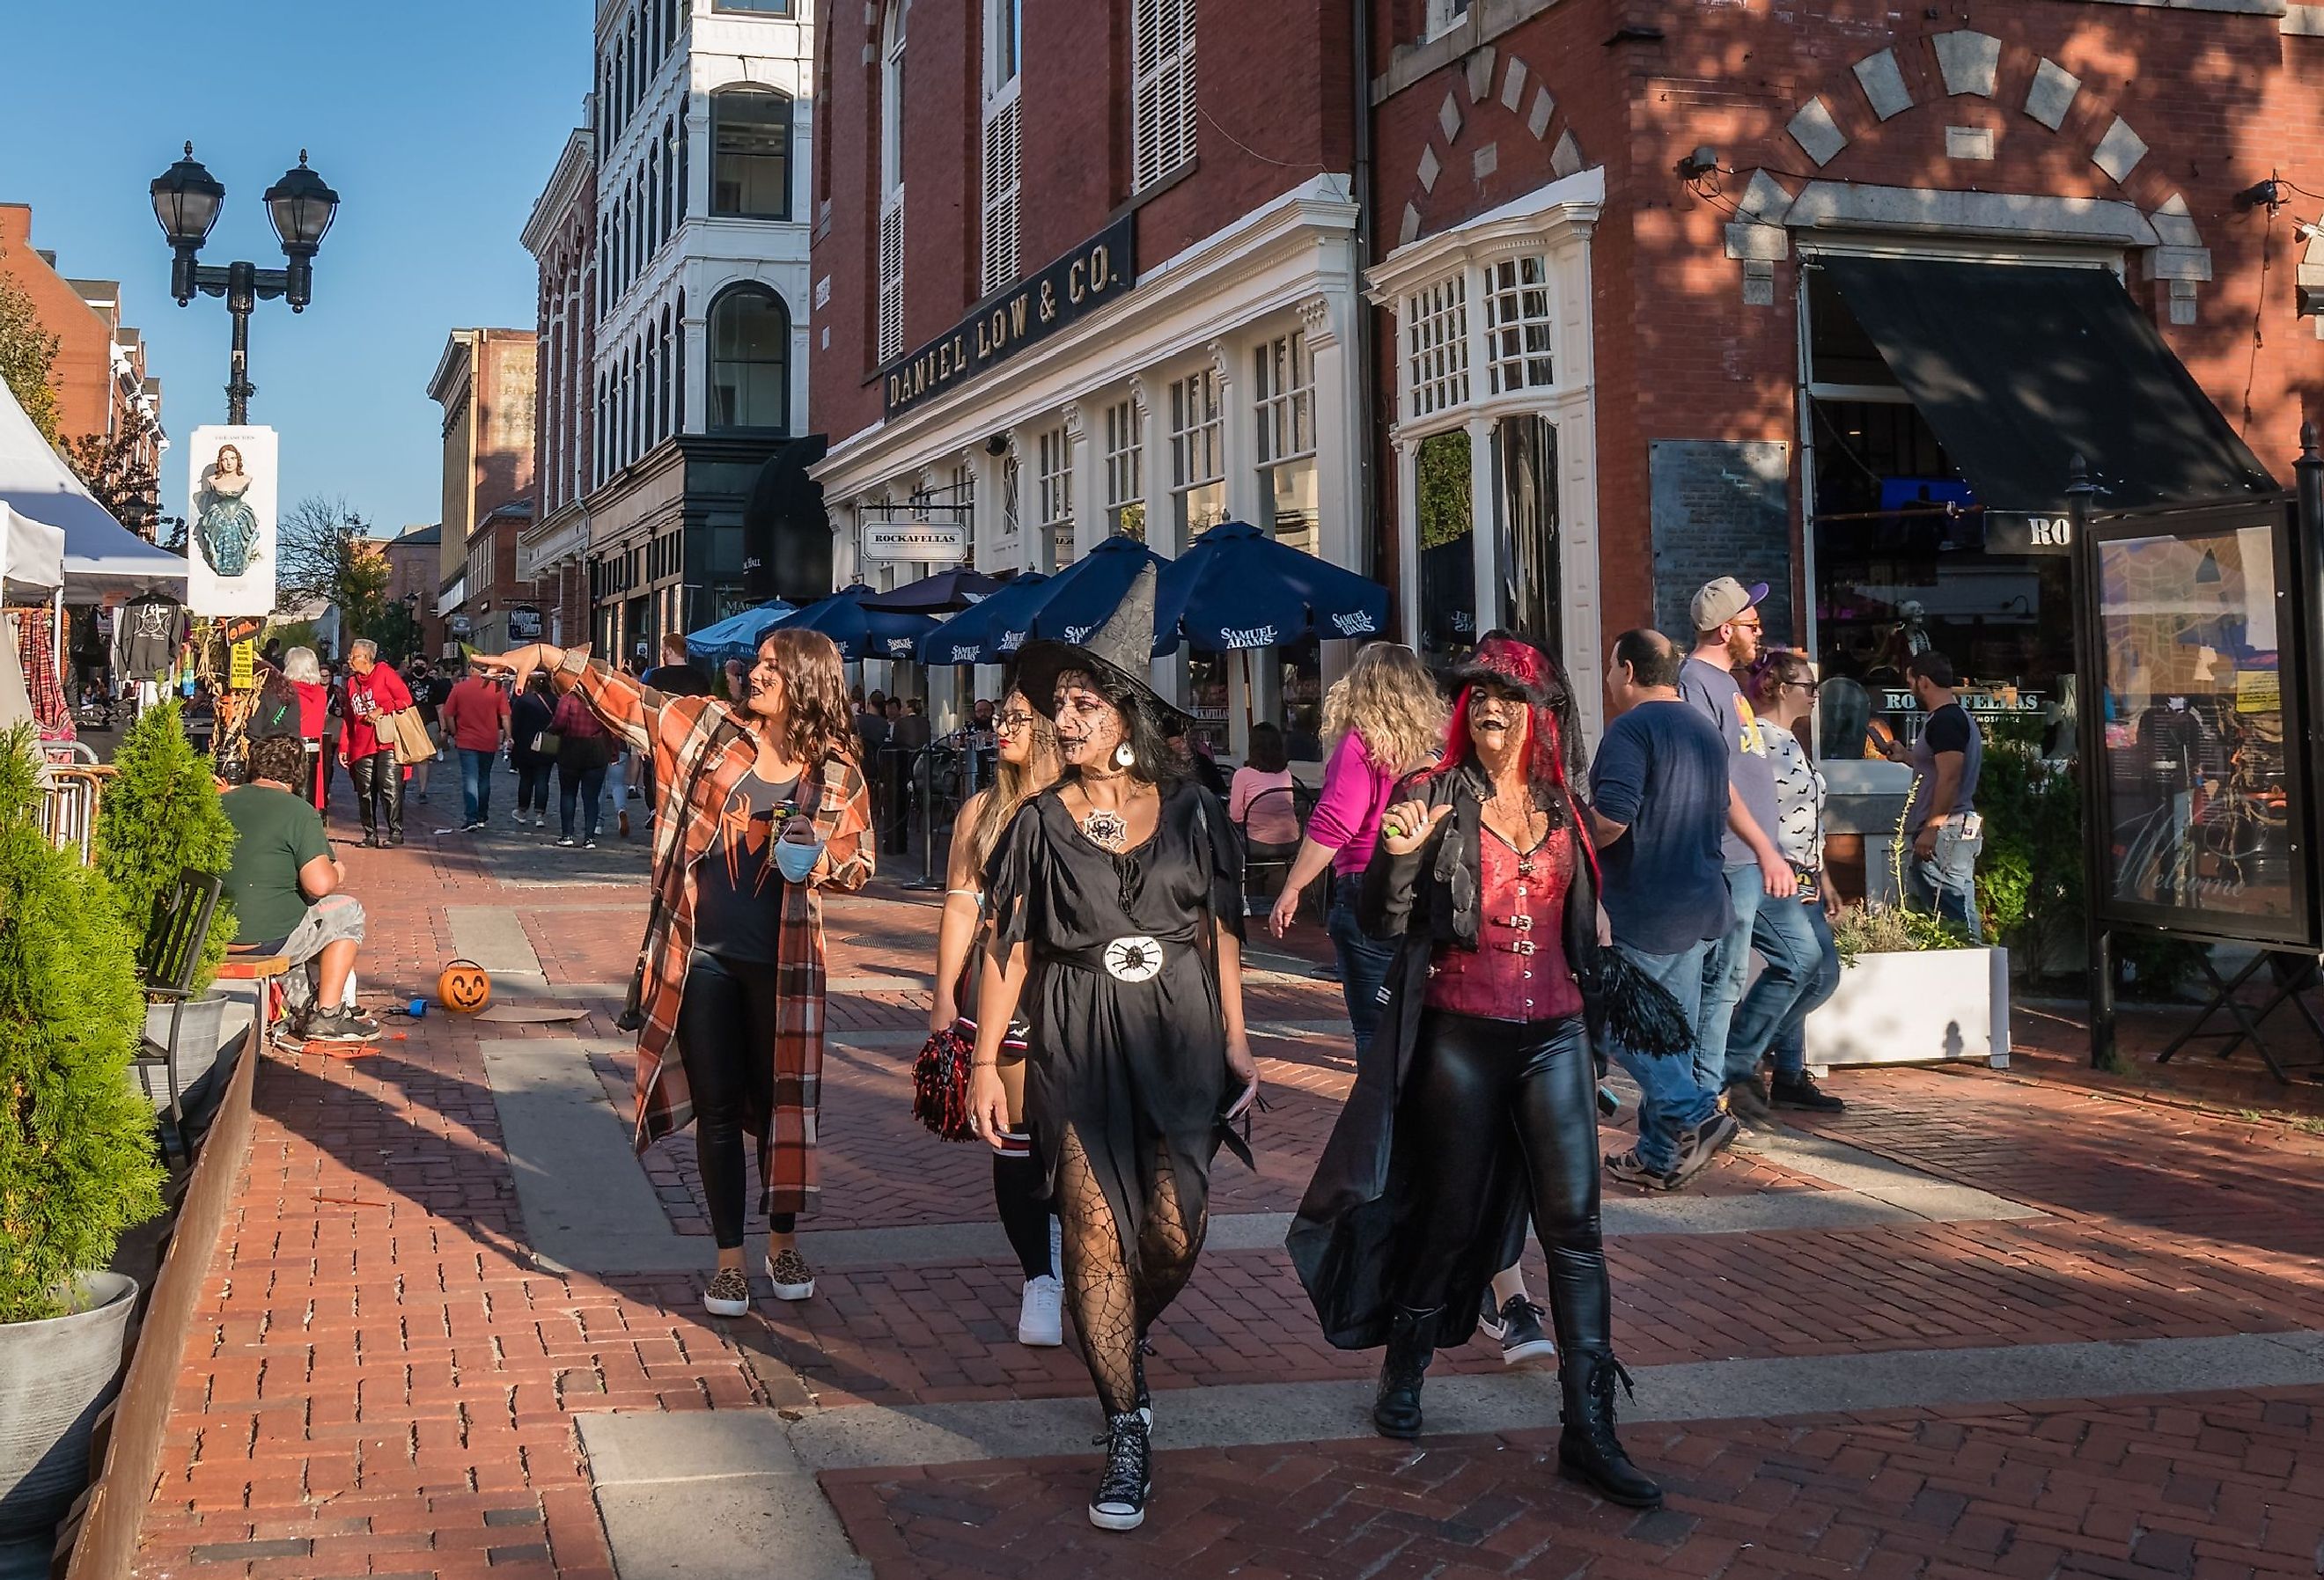 People dressed in costumes at the annual Haunted Happenings event in Salem, Massachusetts. Image credit Heidi Besen via Shutterstock